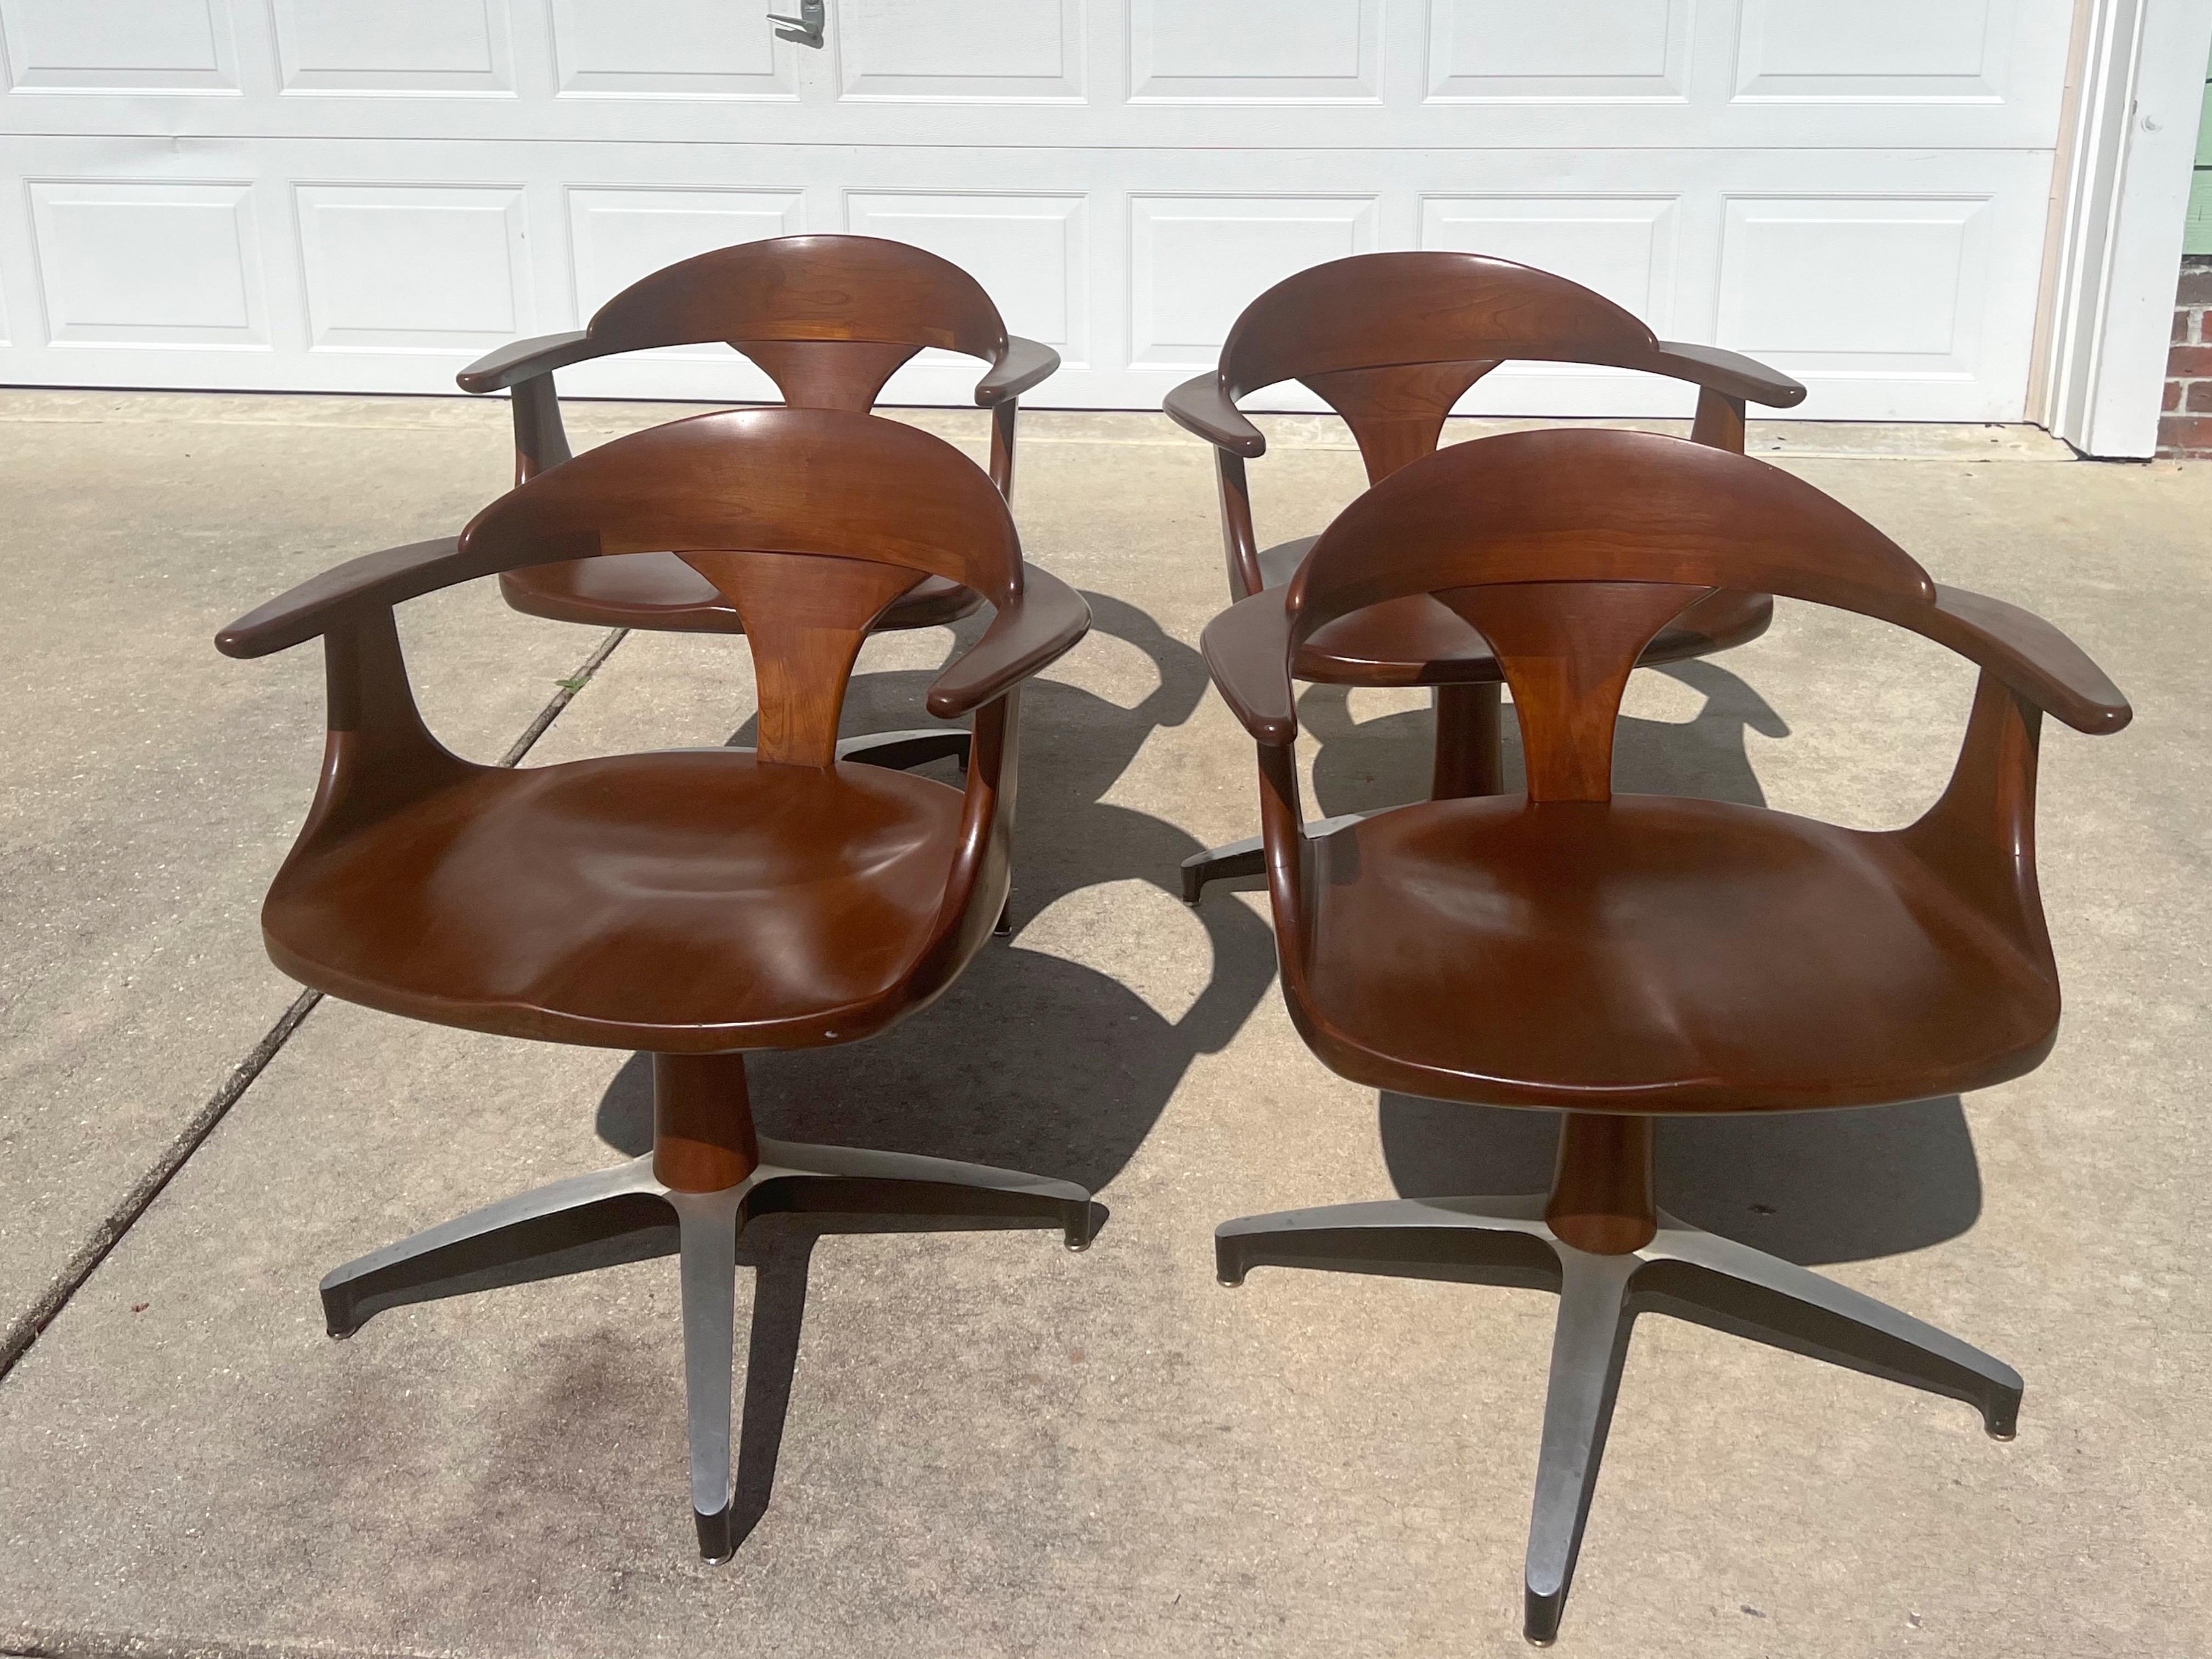 1960s Heywood Wakefield “Cliff House” Dining Table and Chairs, a Set of 5 For Sale 6